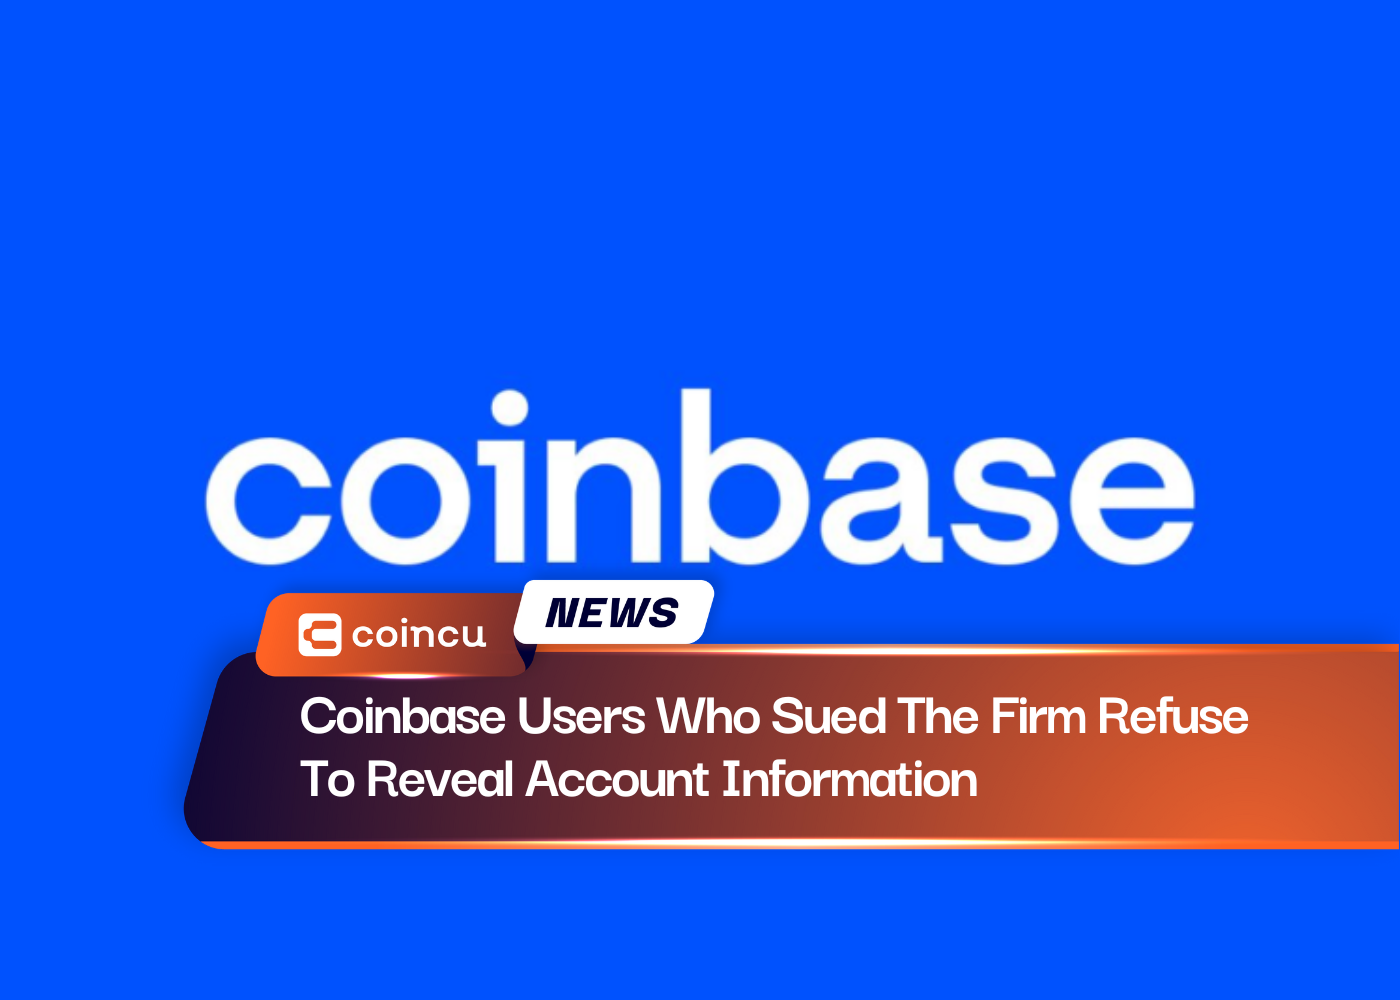 Coinbase Users Who Sued The Firm Refuse To Reveal Account Information